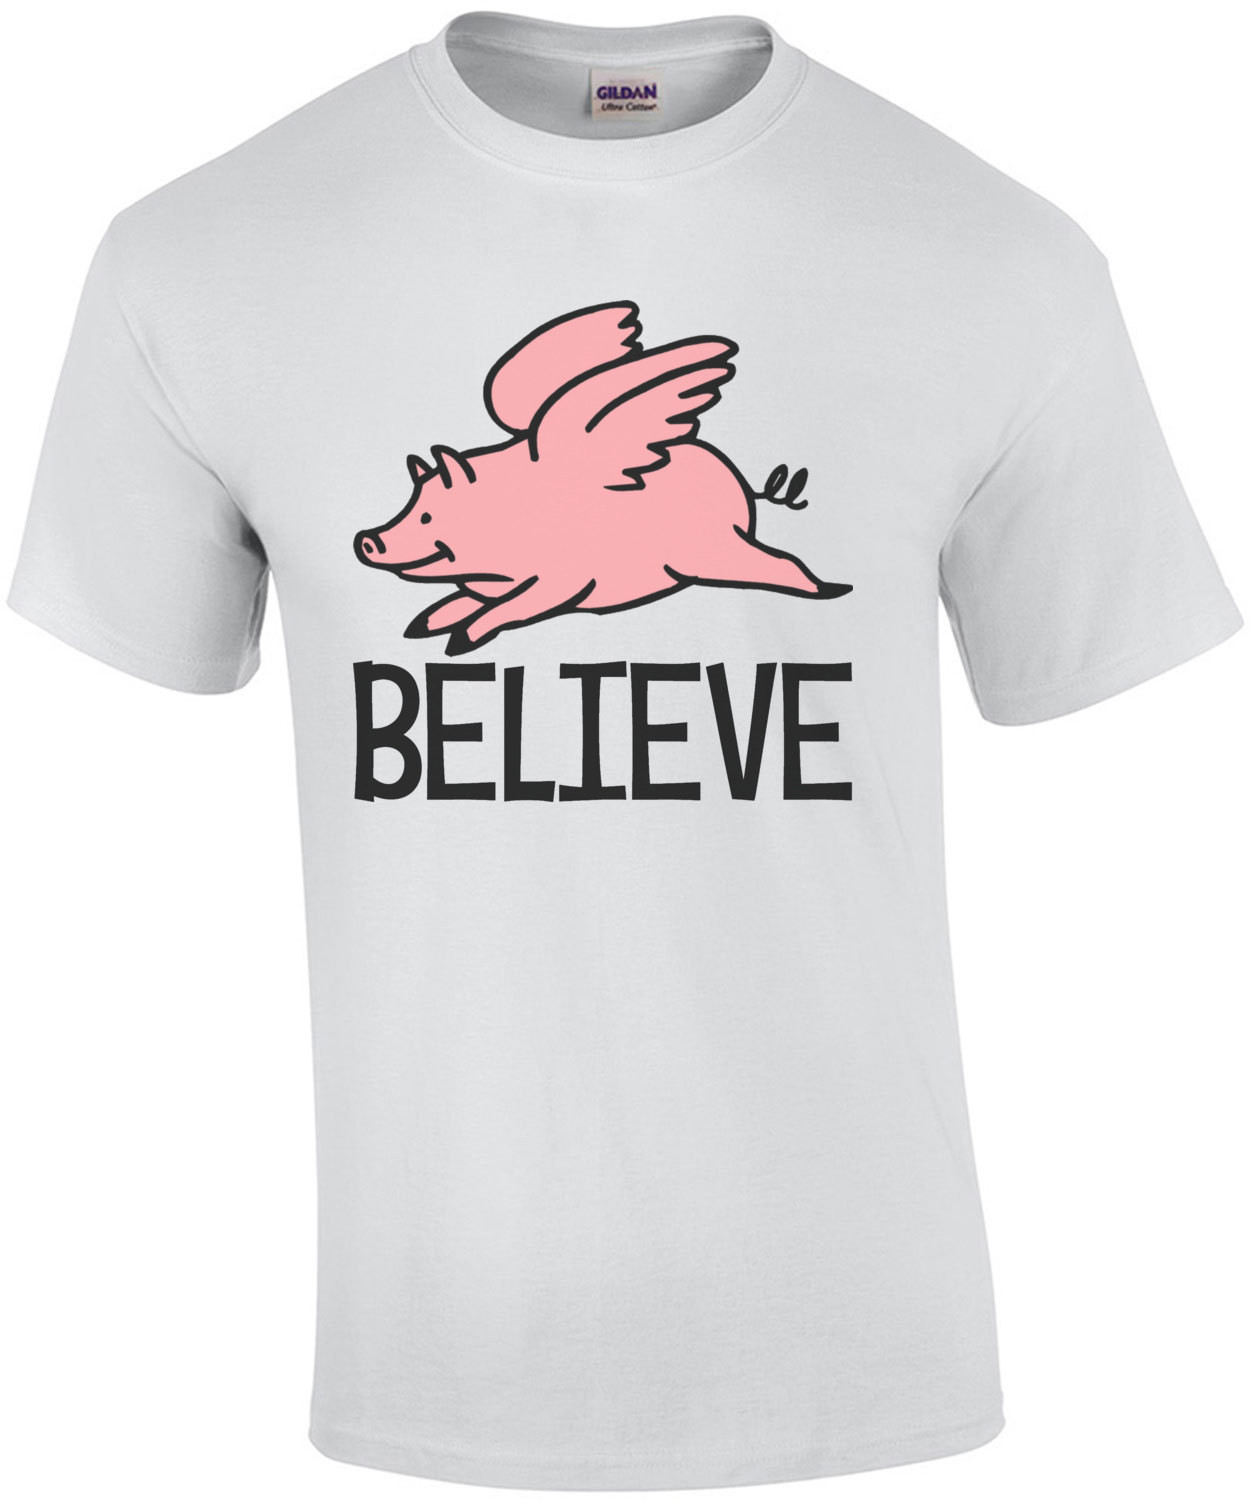 Believe Pigs Fly - Funny T-Shirt